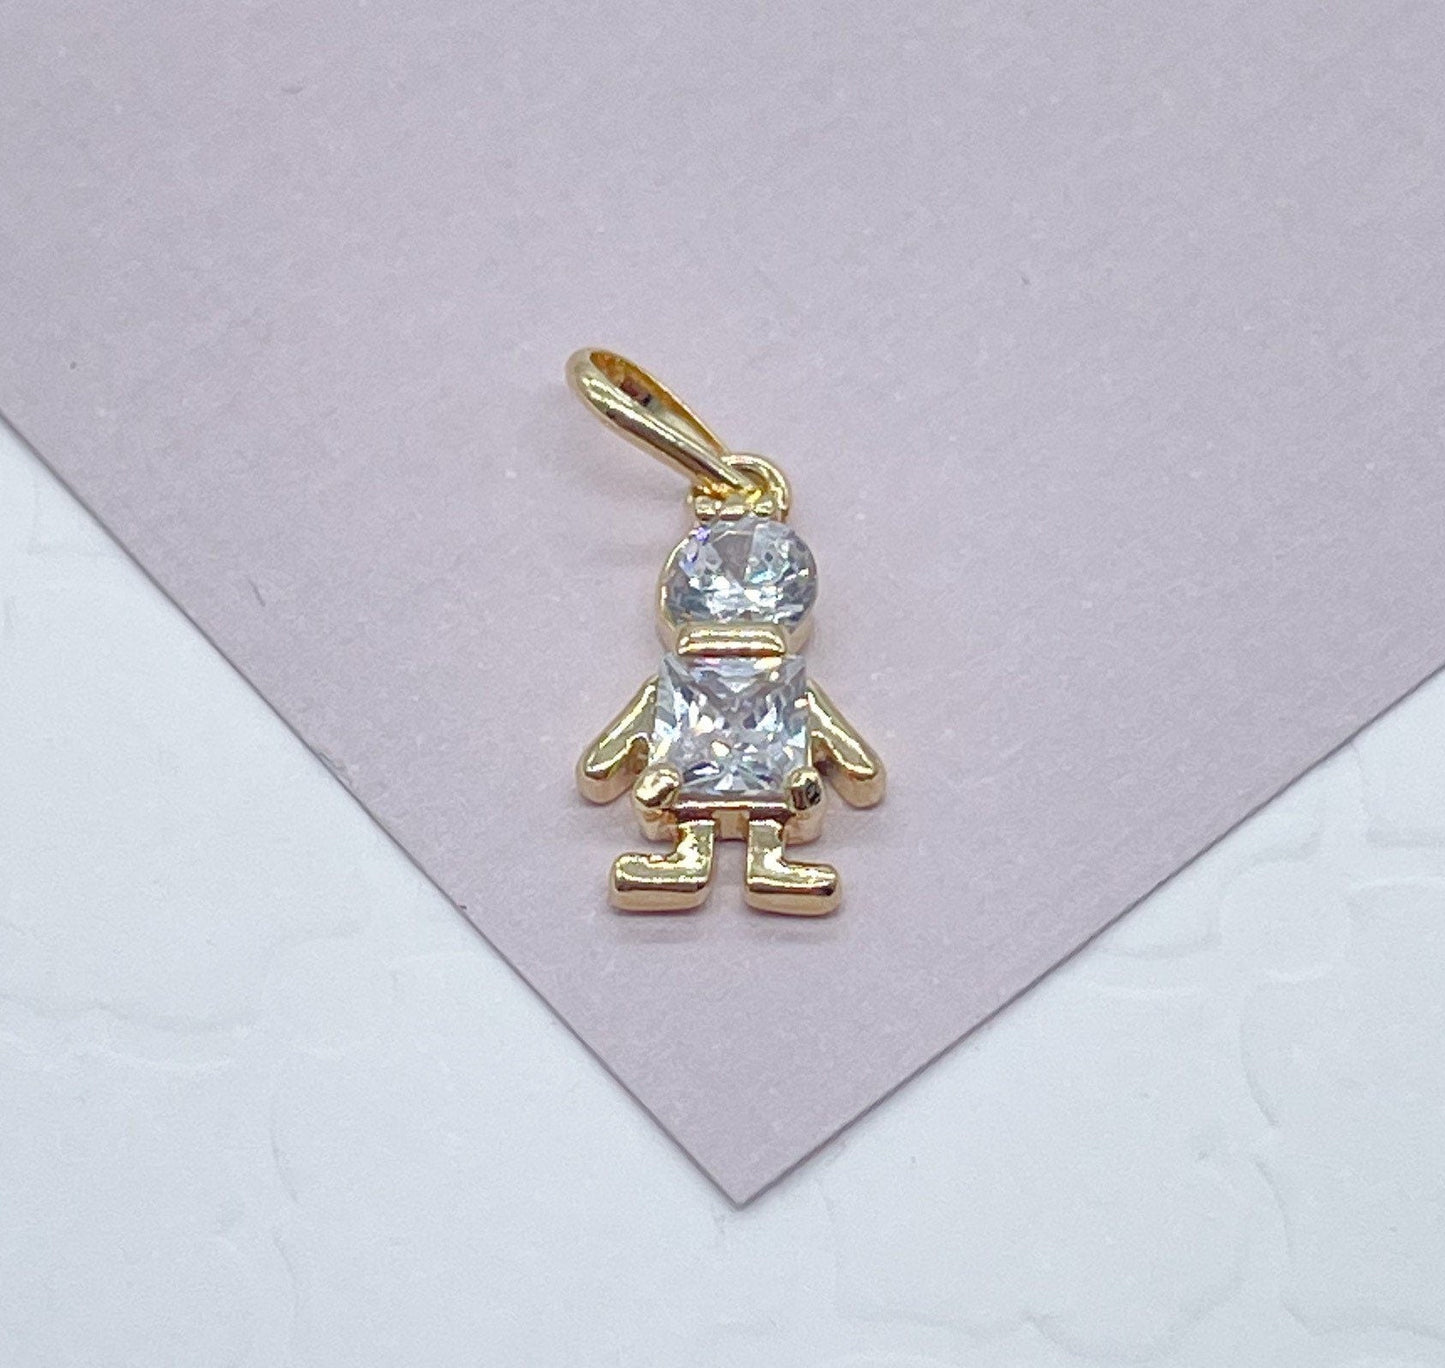 18k Gold Filled Kids Charm Boy or Girl Featuring Big Cubic Zirconia   And Jewelry Making Supplies Pendant Family Jewelry Mother